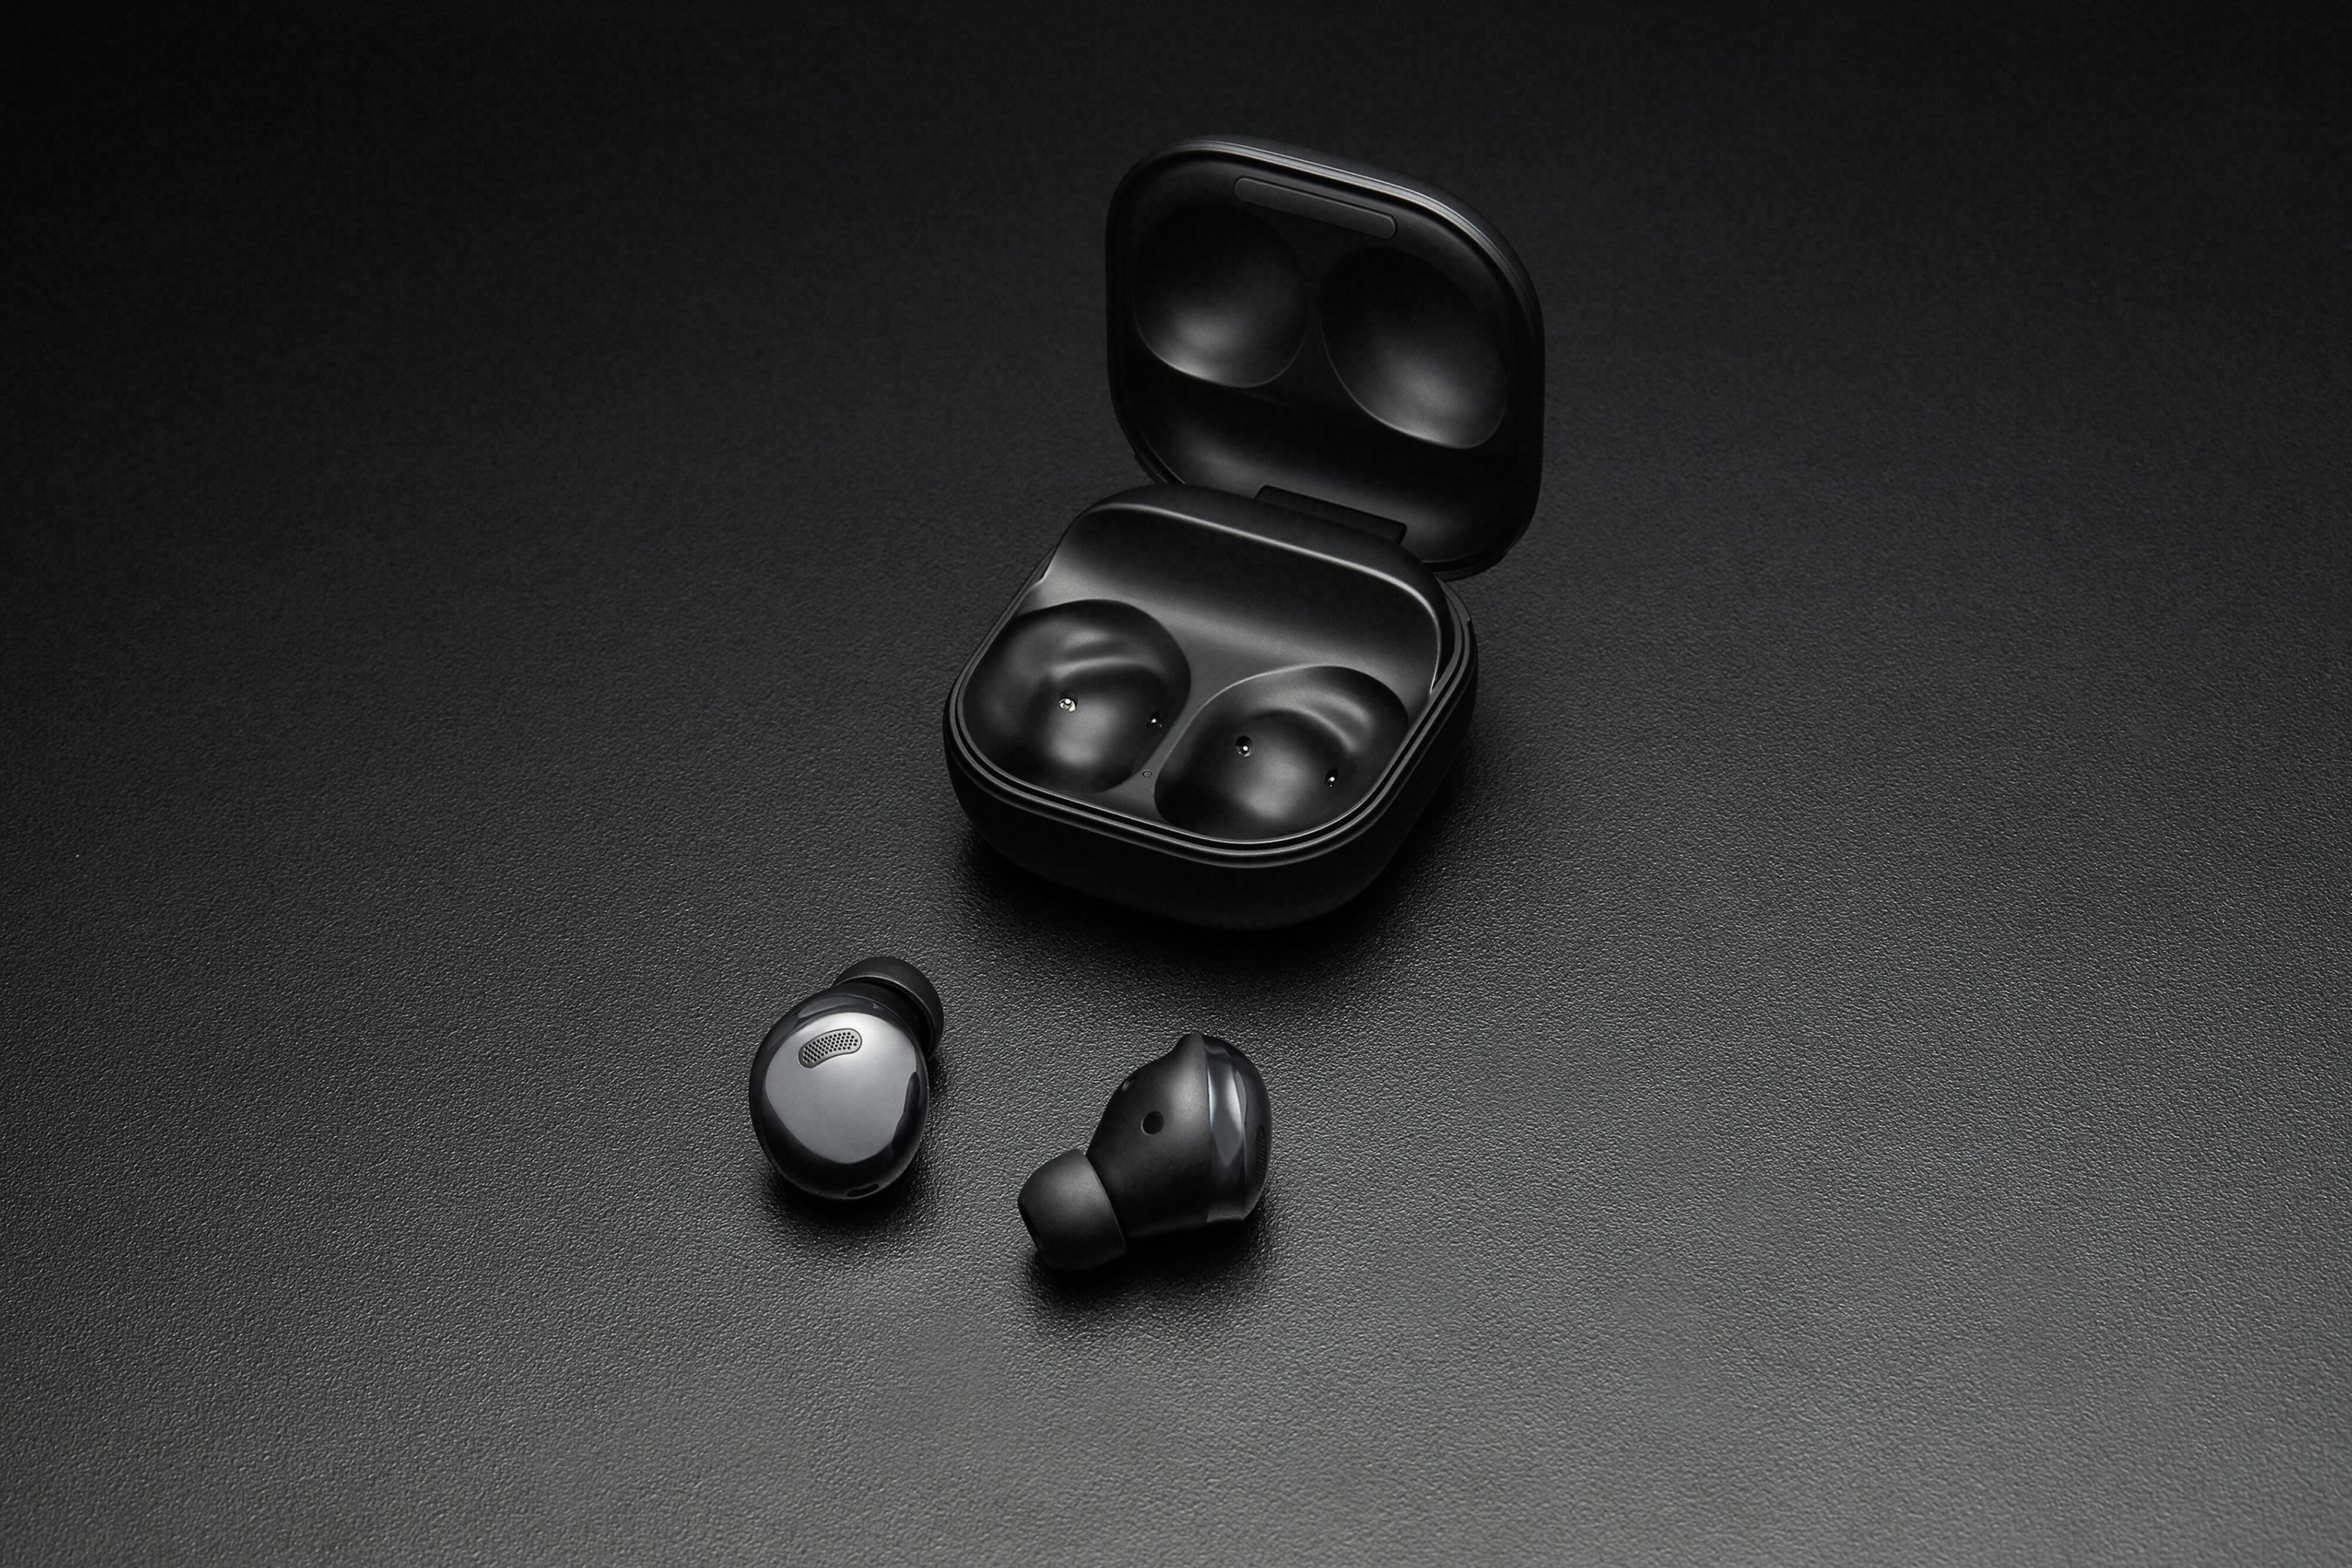 Samsung Galaxy Buds Pro tips and tricks: Get the most from your new wireless earbuds